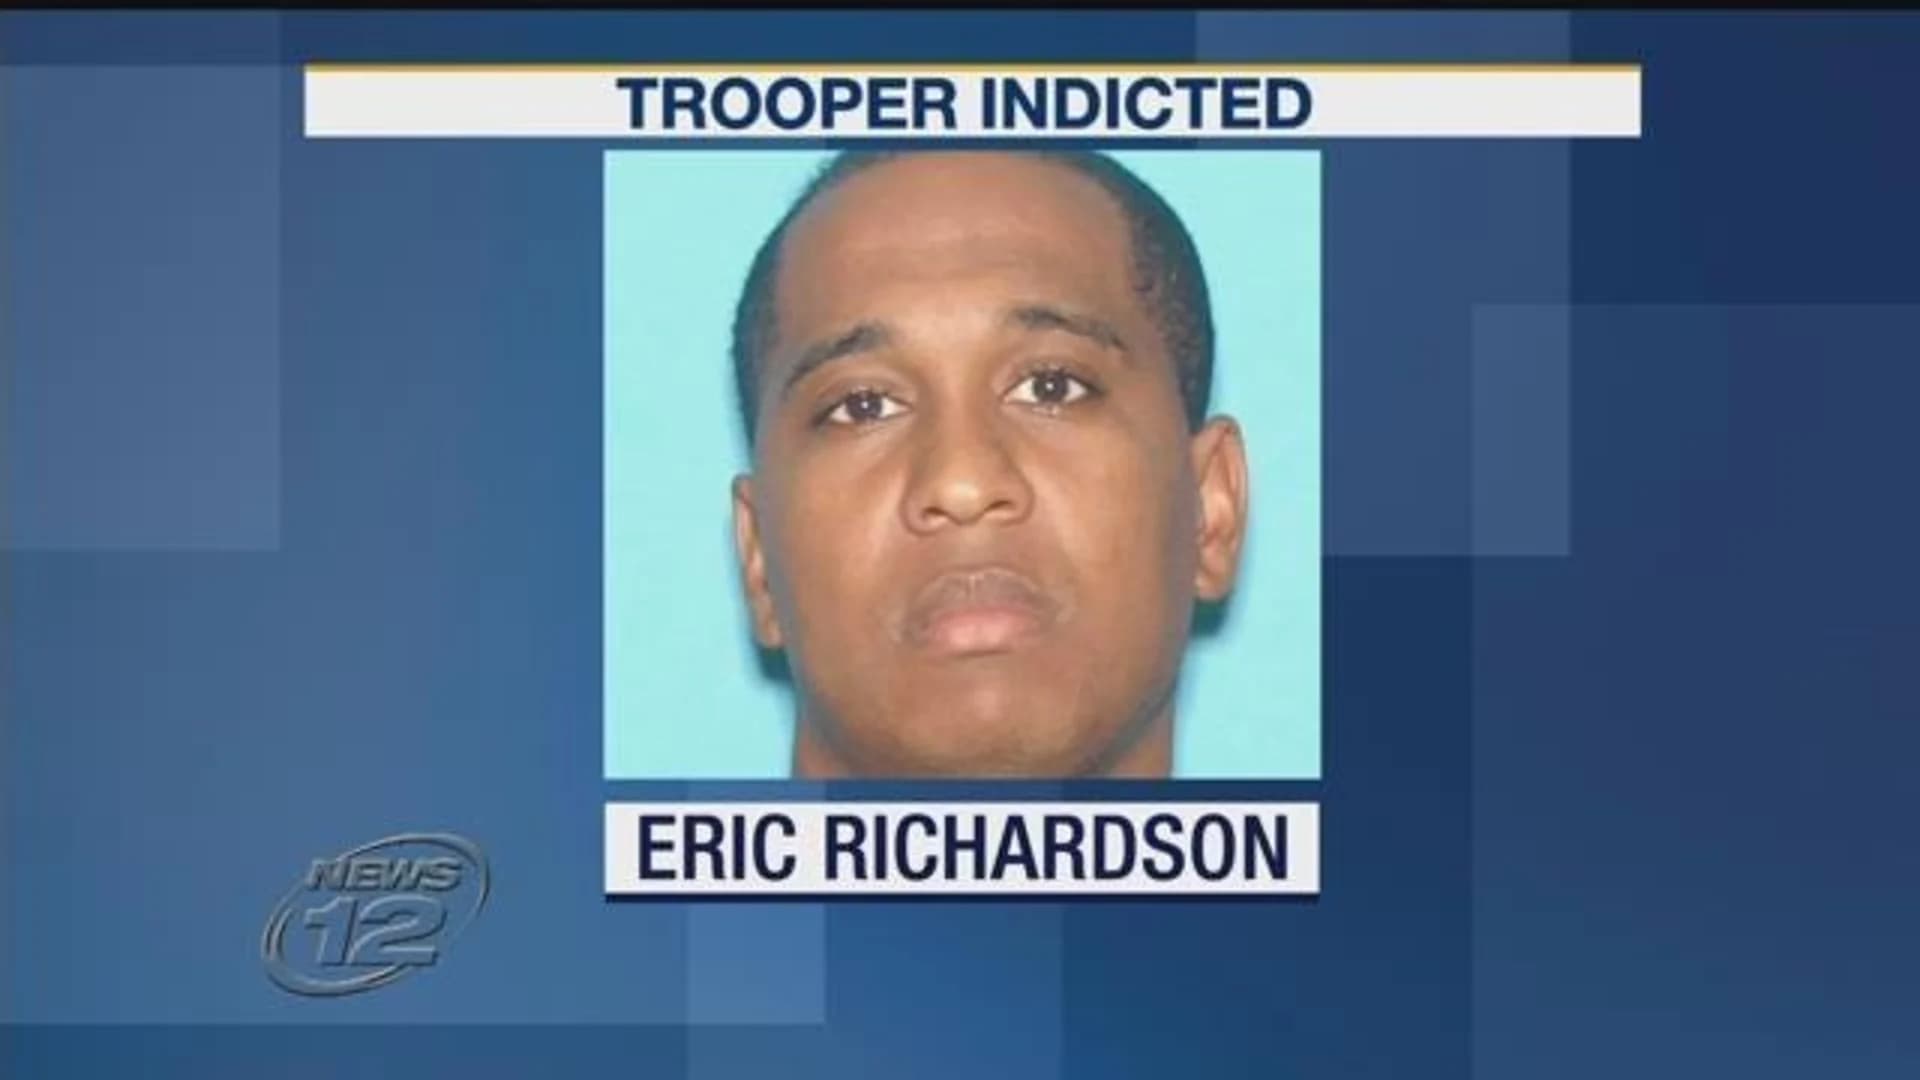 State trooper accused of falsifying records, conducting illegal stops